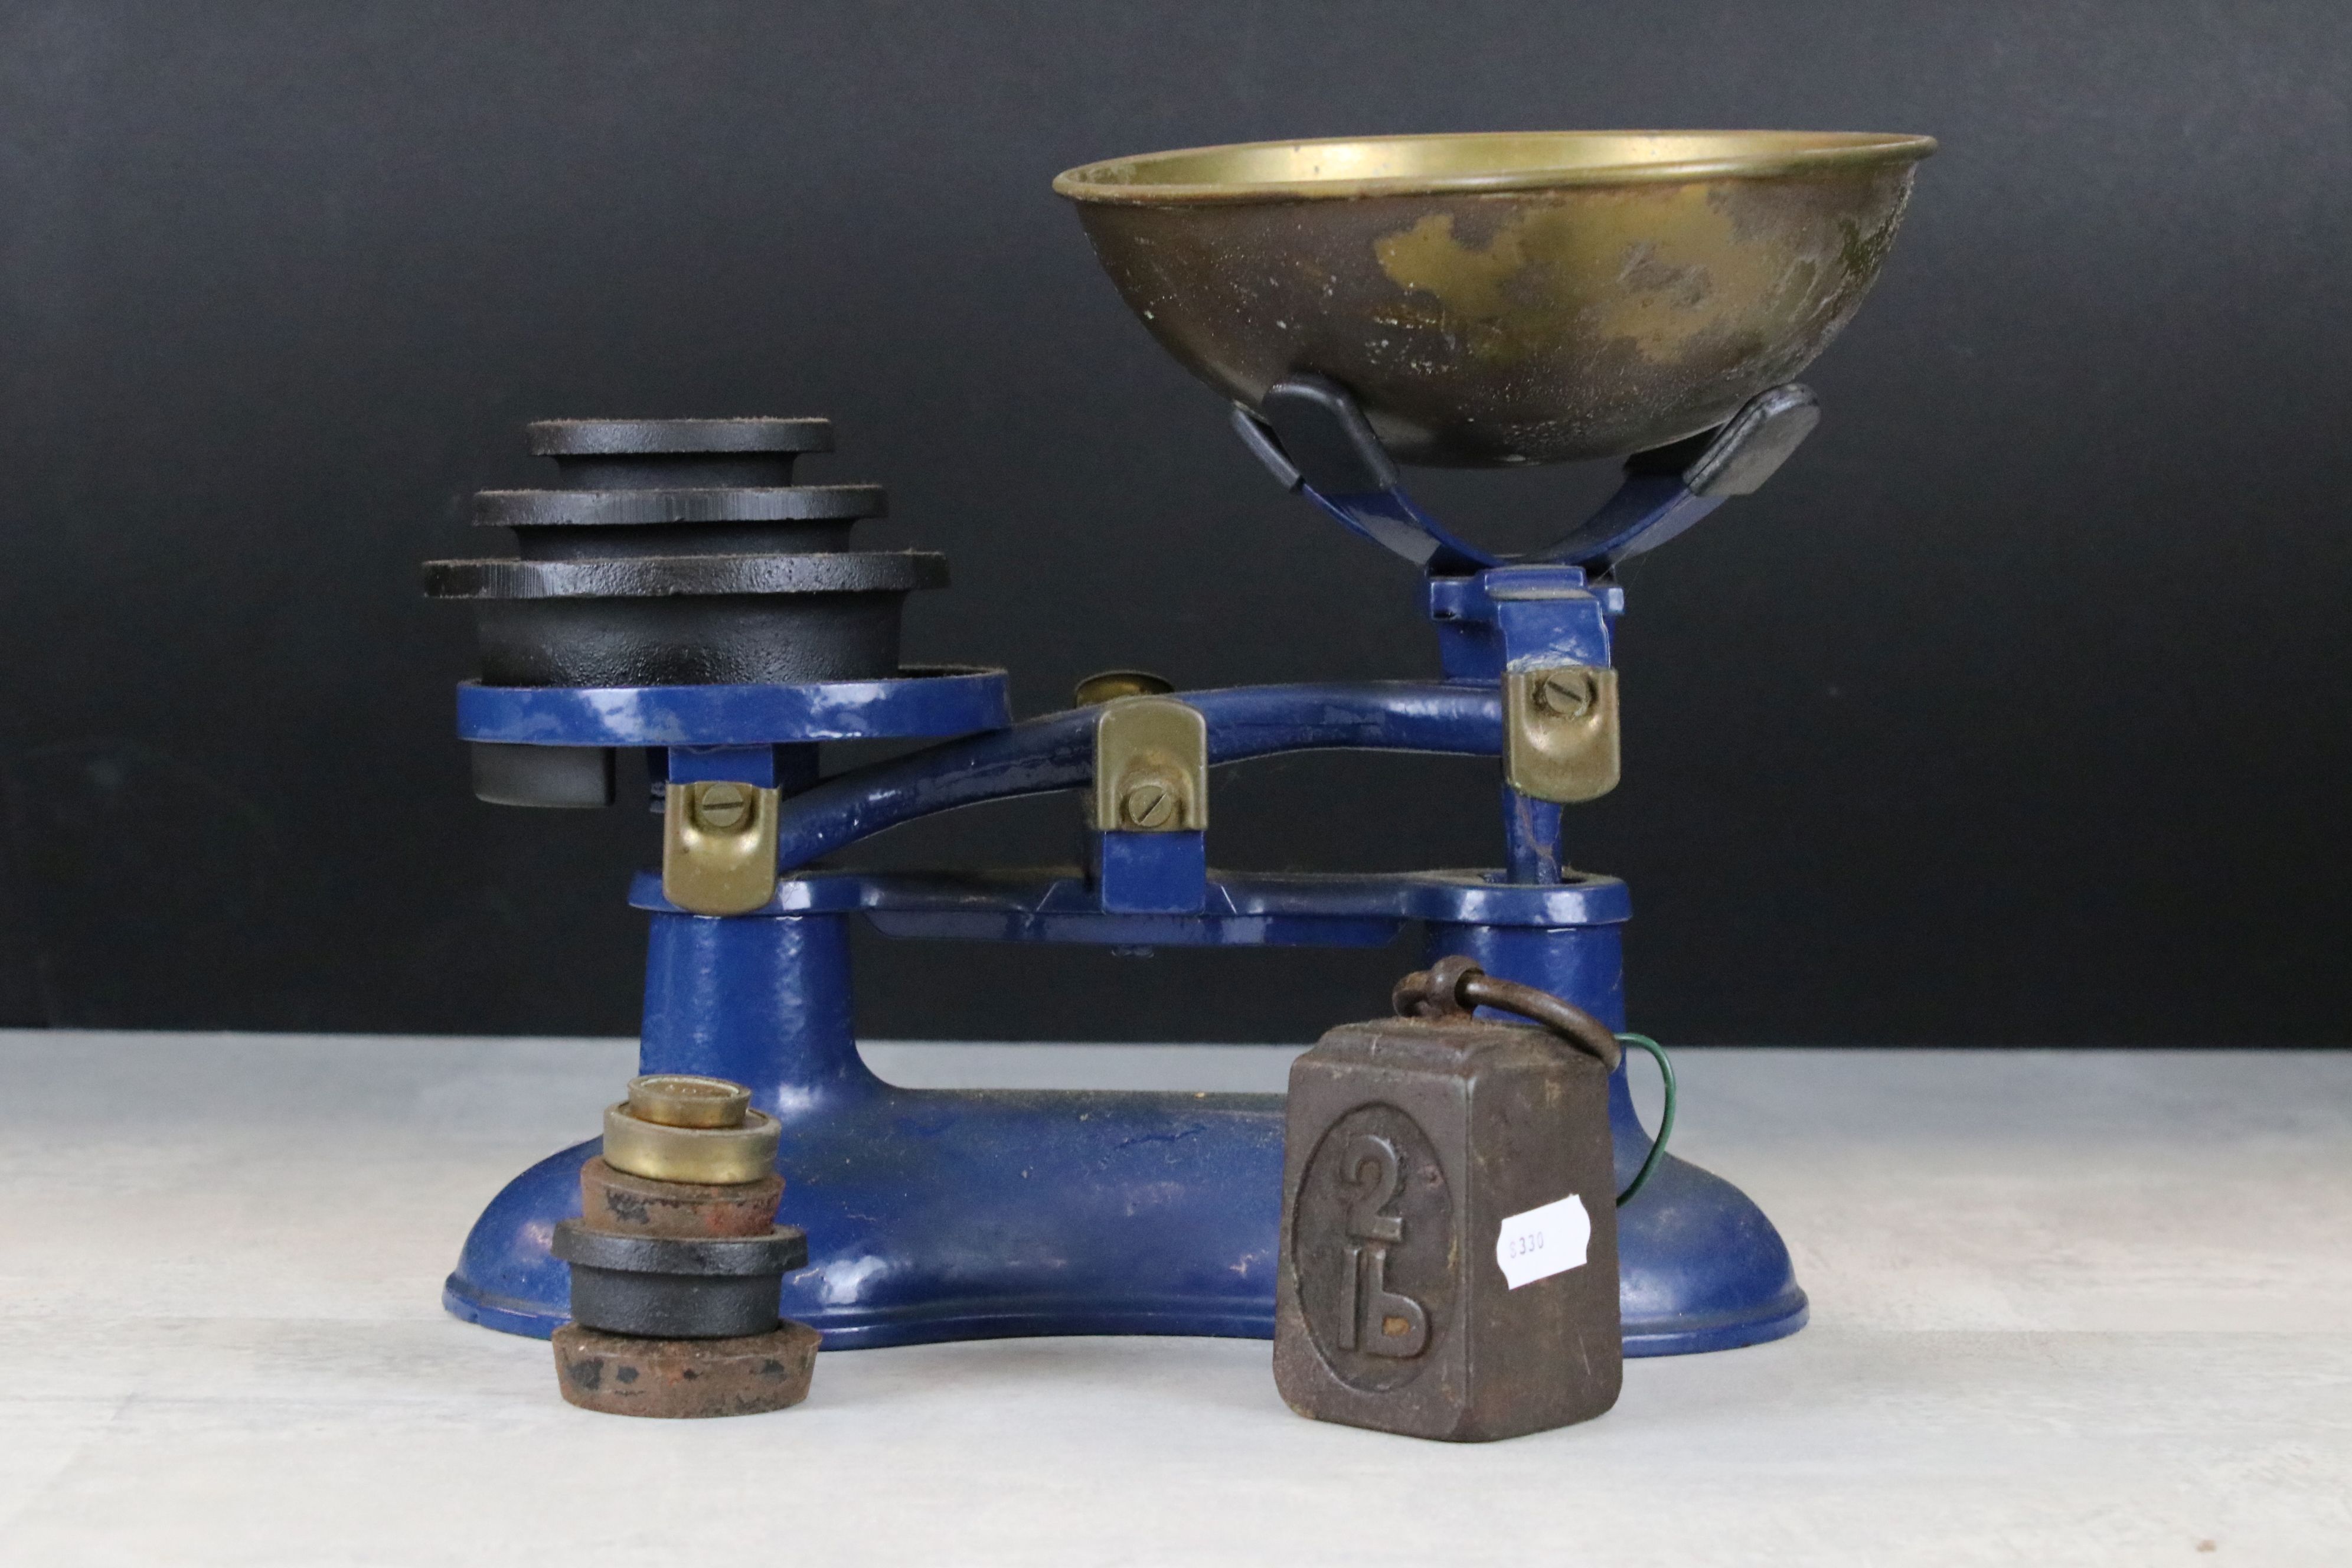 A set of blue Victor kitchen scales complete with weights.